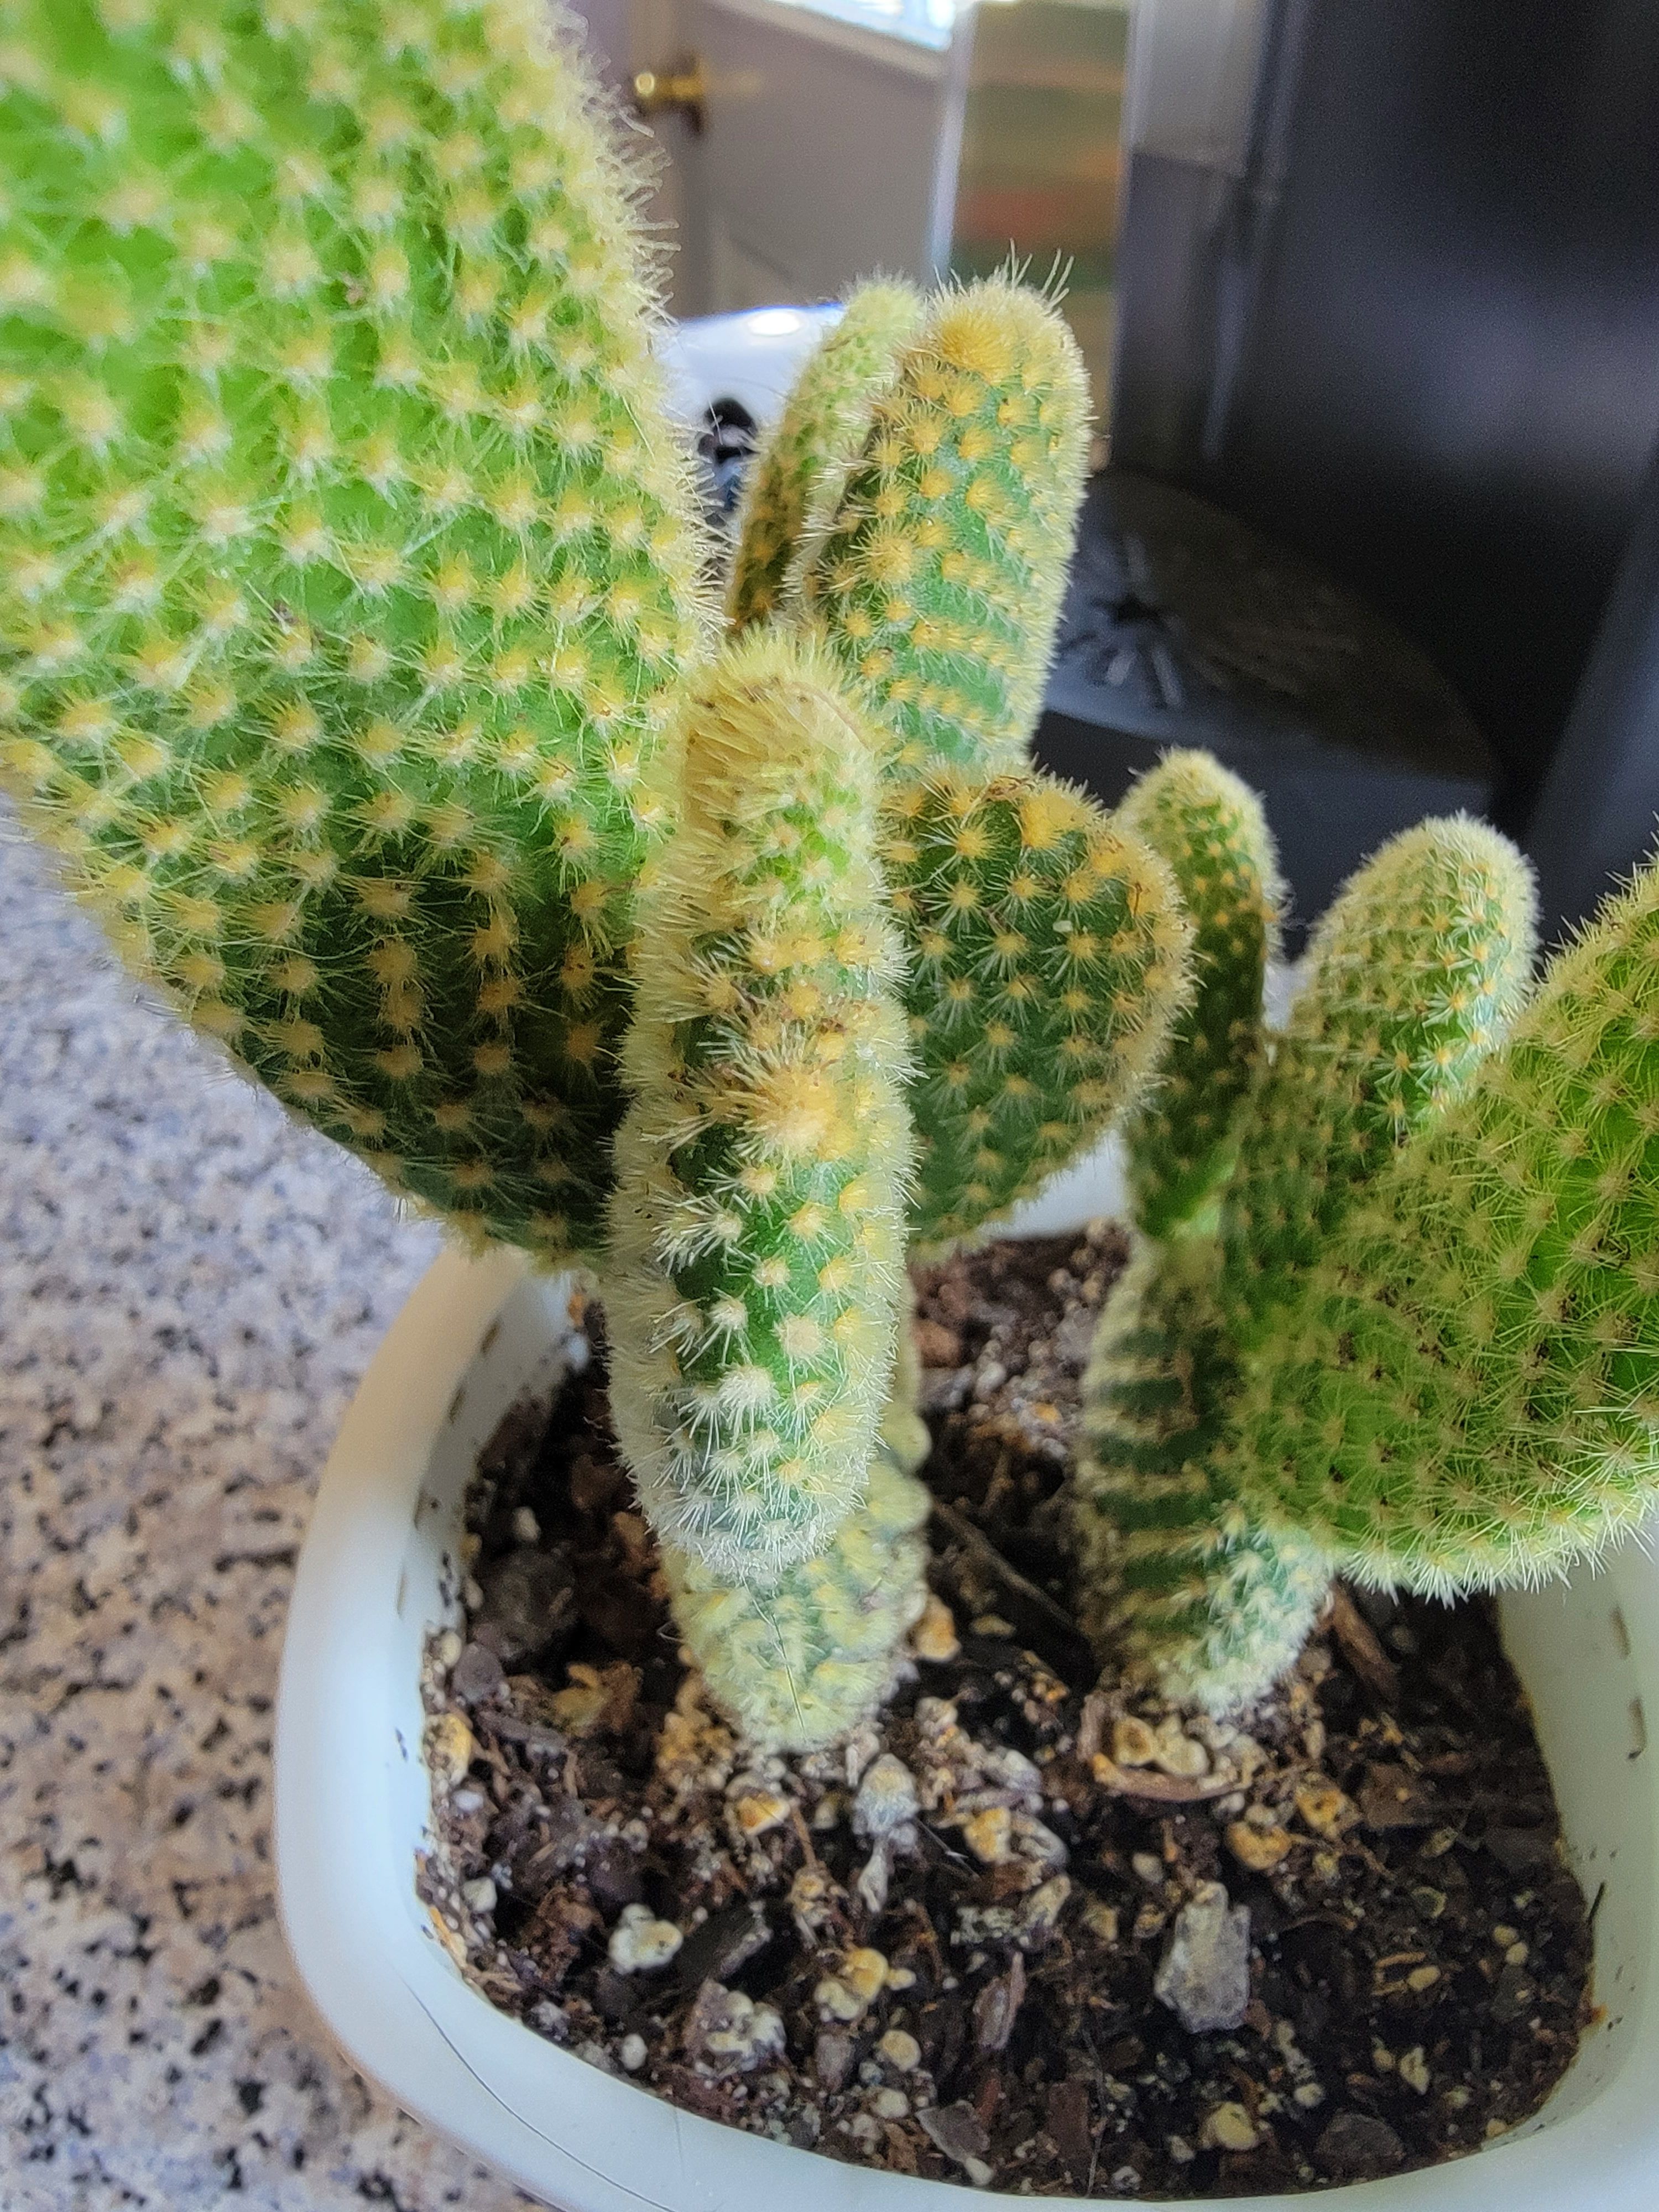 picture of small cactus using rear wide primary camera on s21 ultra